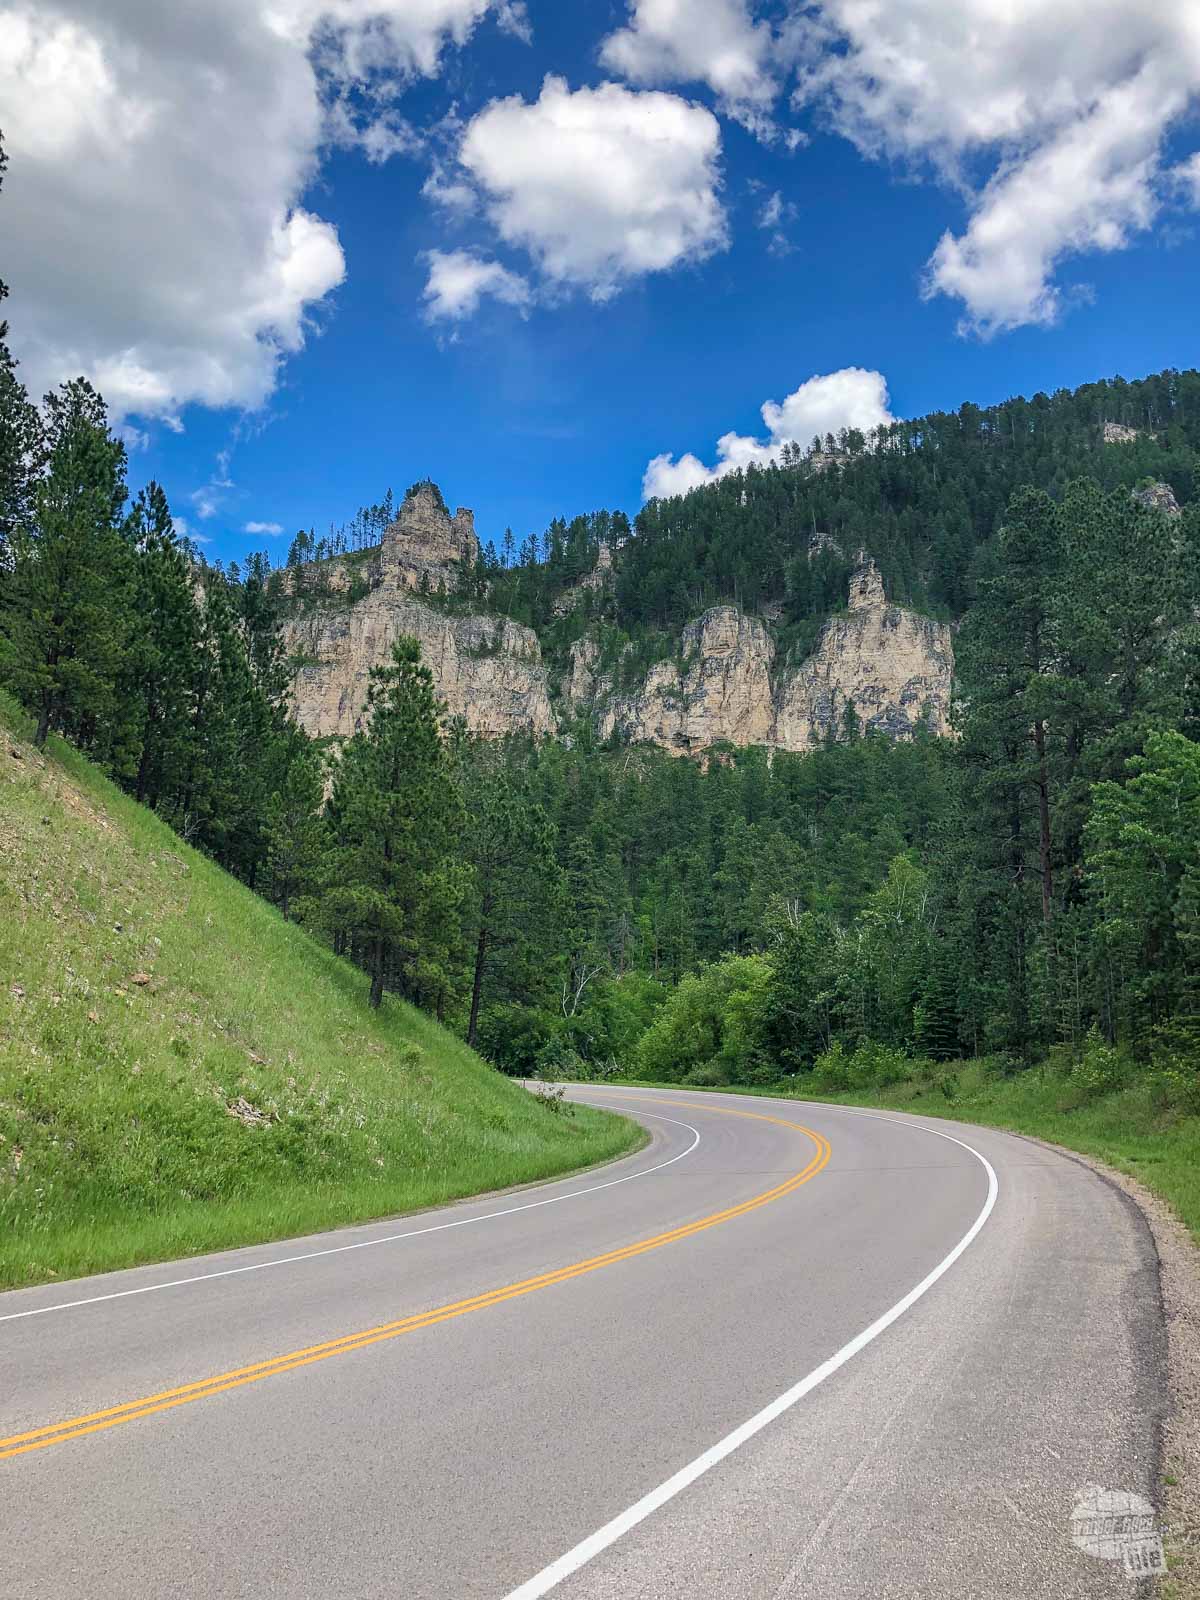 The drive through Spearfish Canyon is one of our top things to do in the Black Hills.